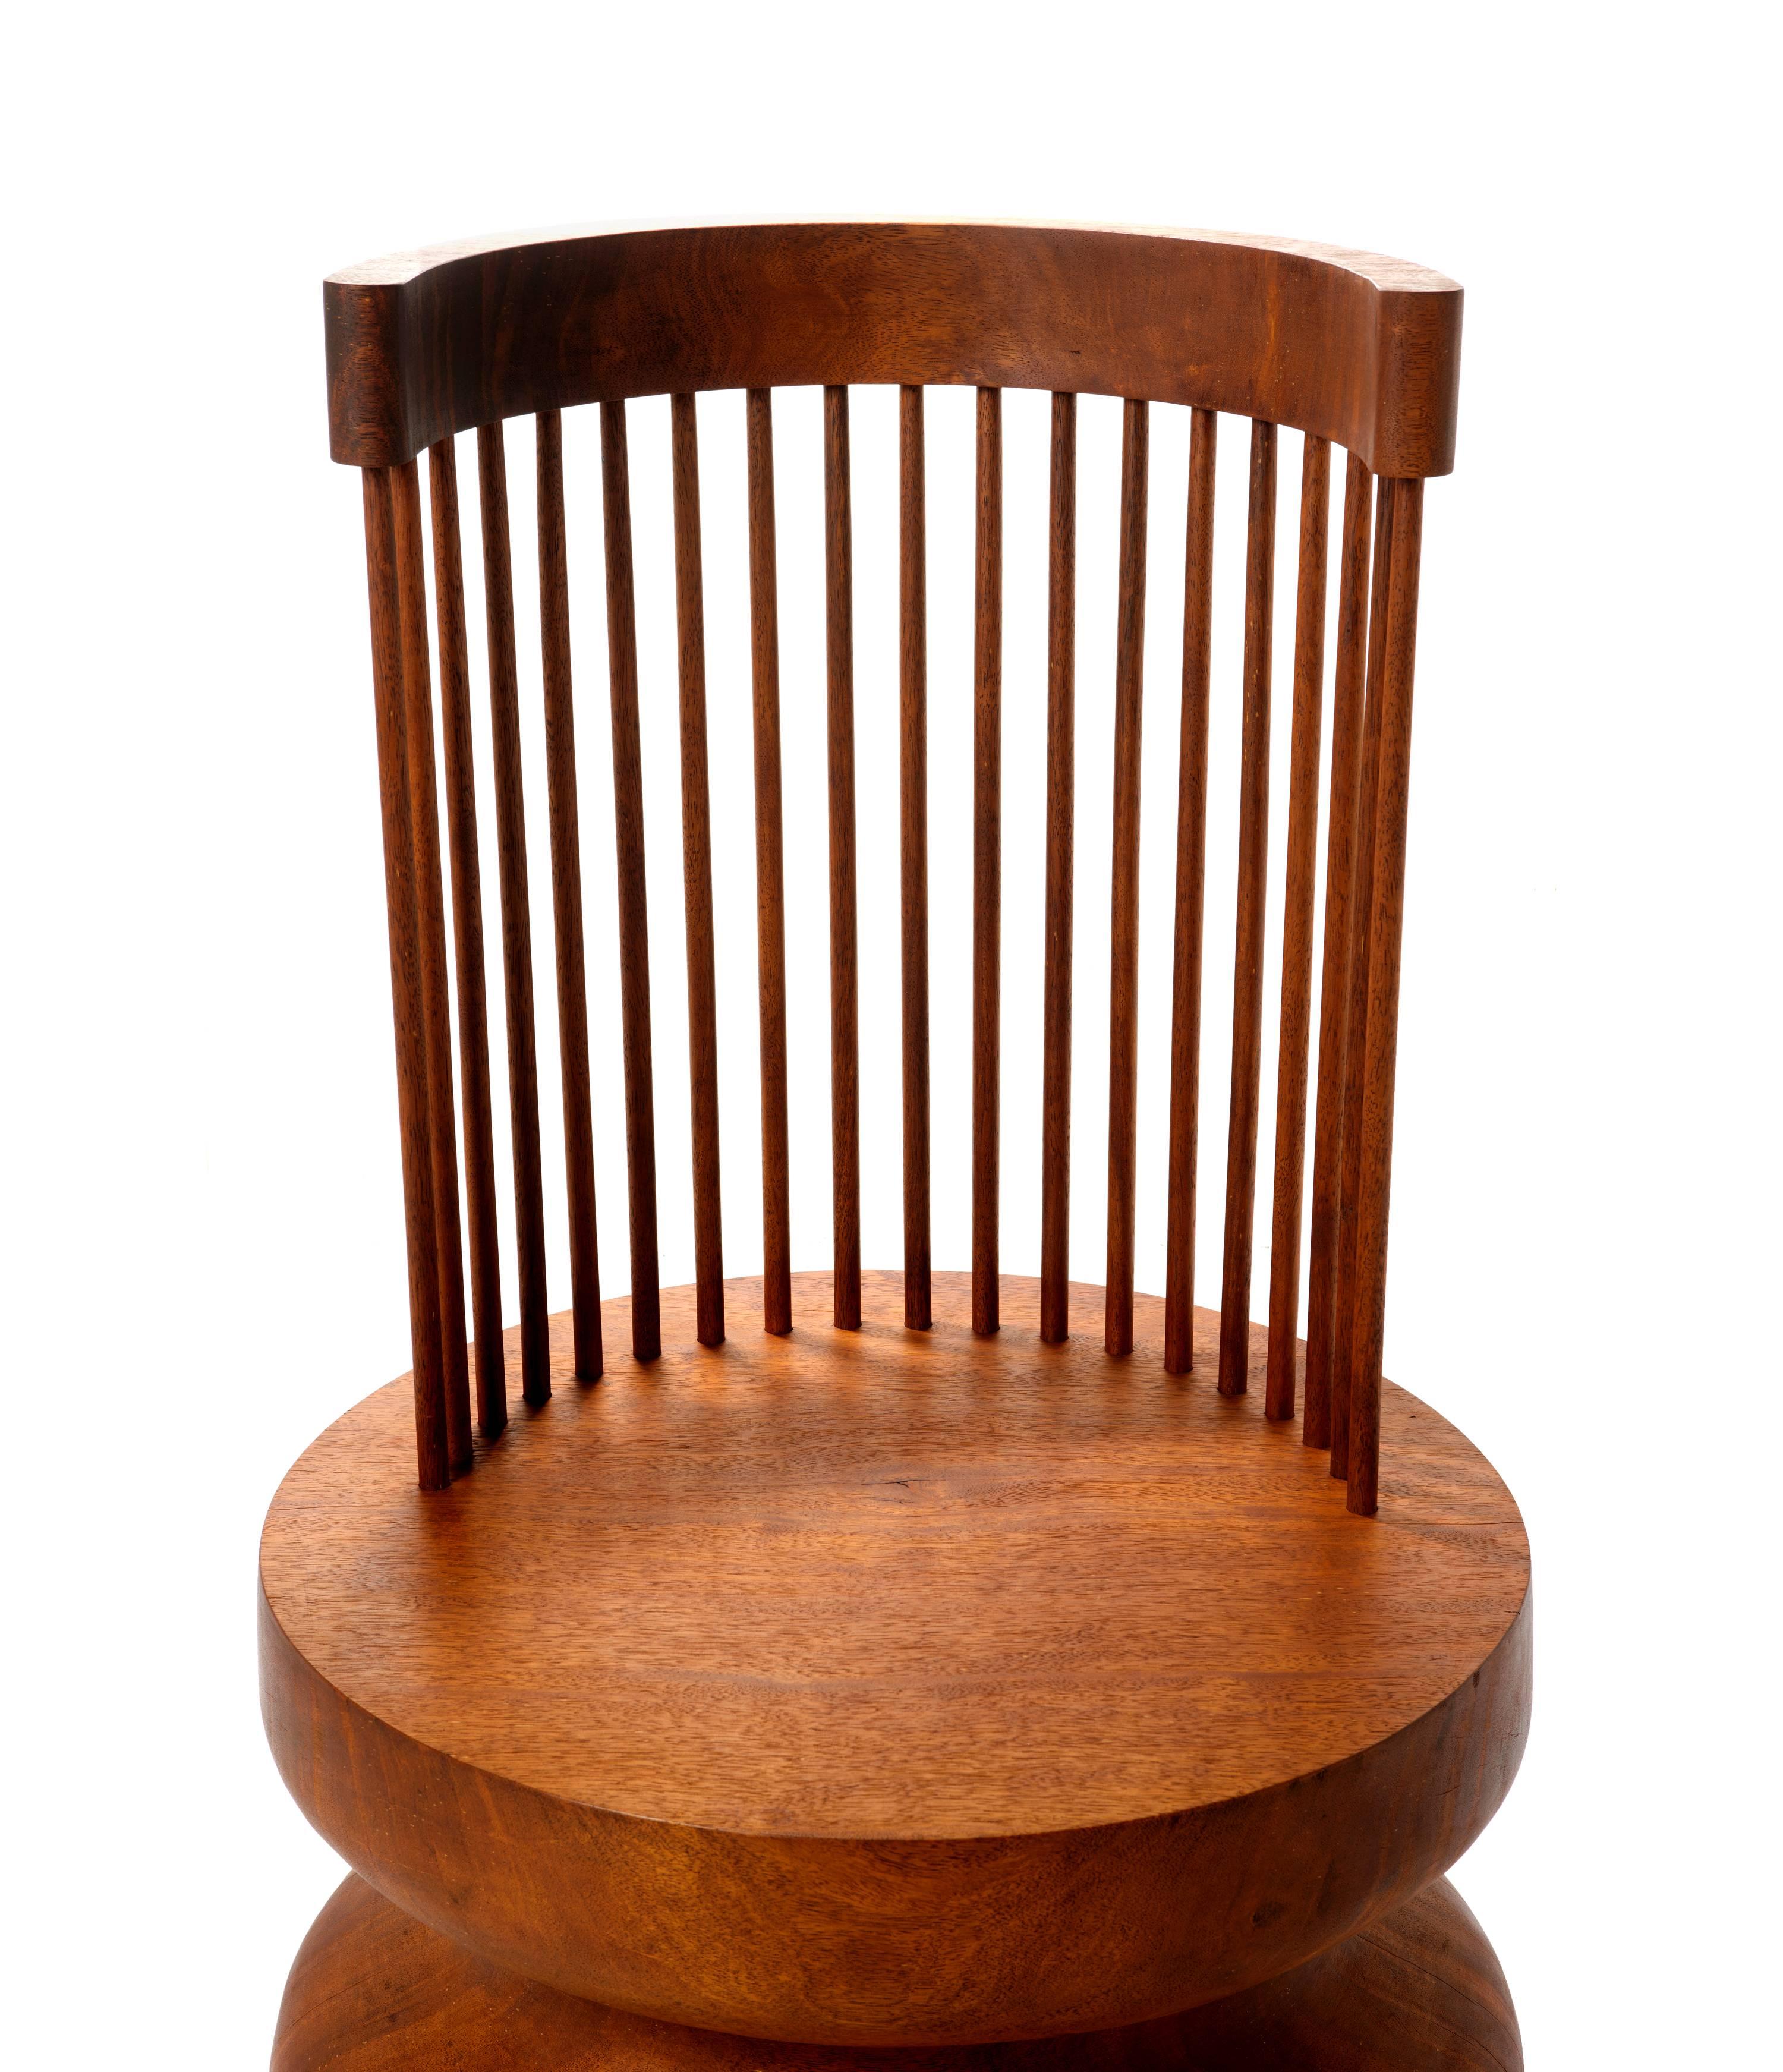 Korean Contemporary Mass Chair #1 in Solid Kwila Wood Chair